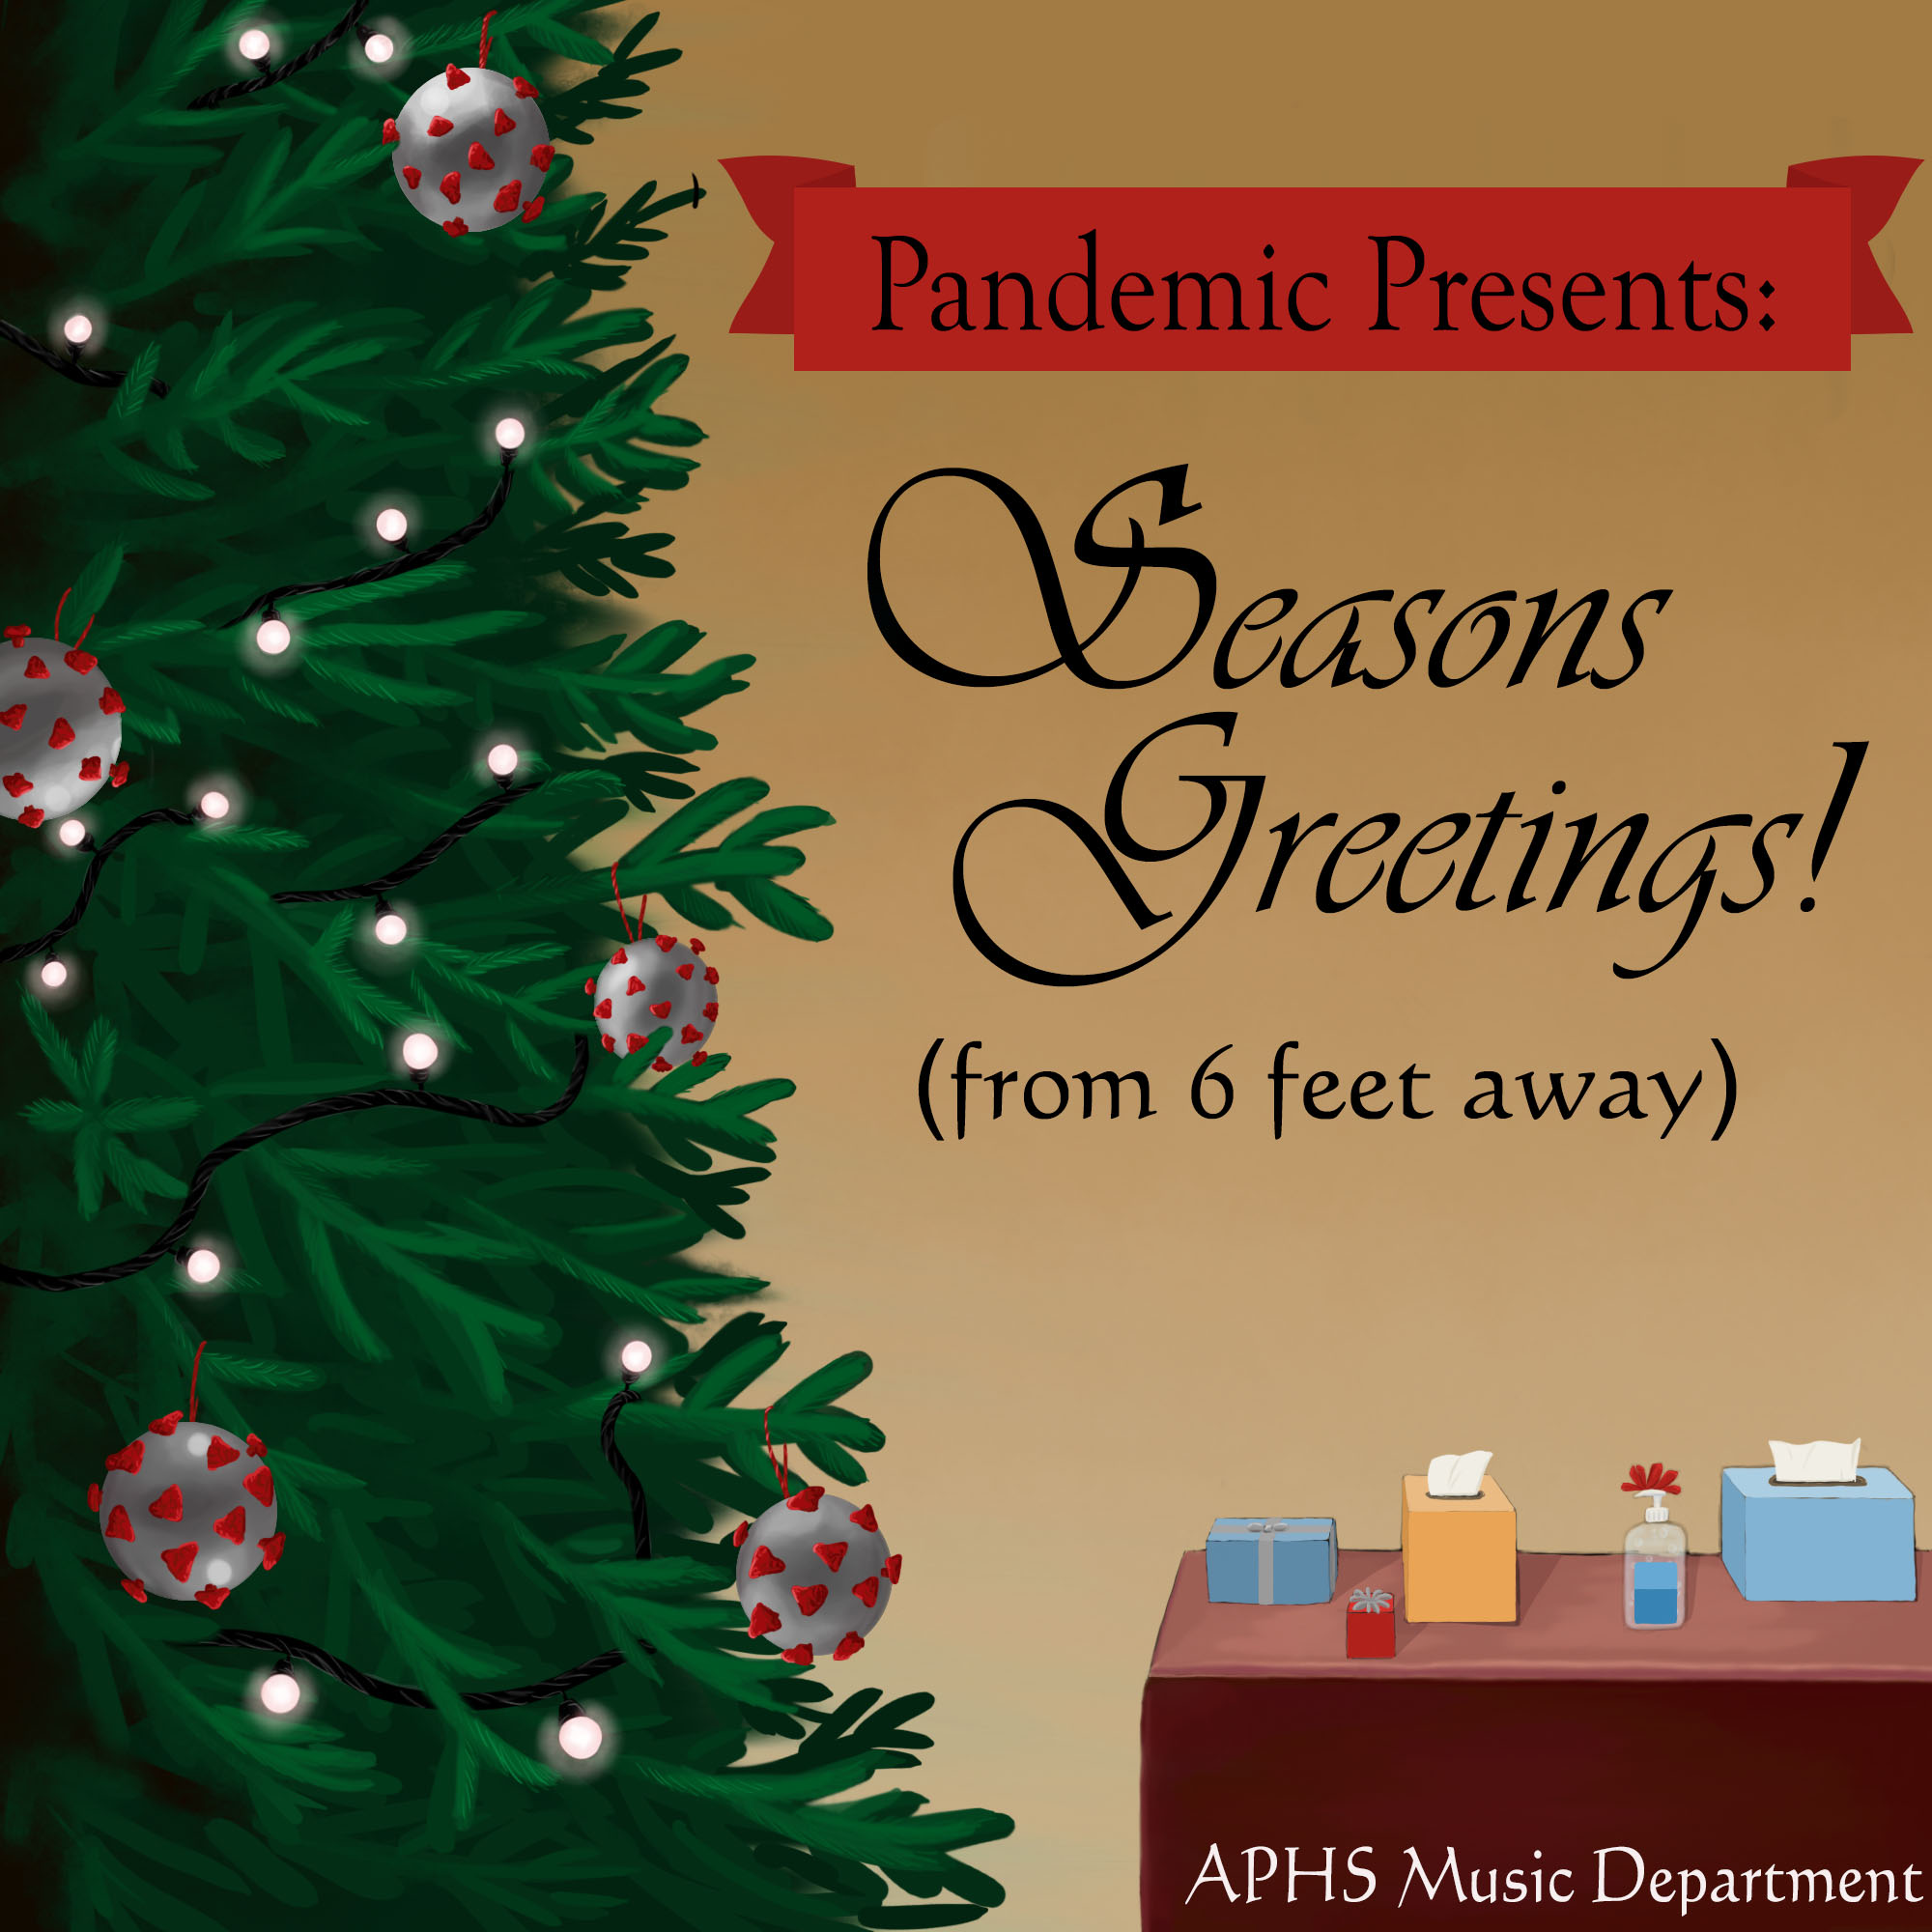 Pandemic Presents Seasons Greetings from 6 feet away cover